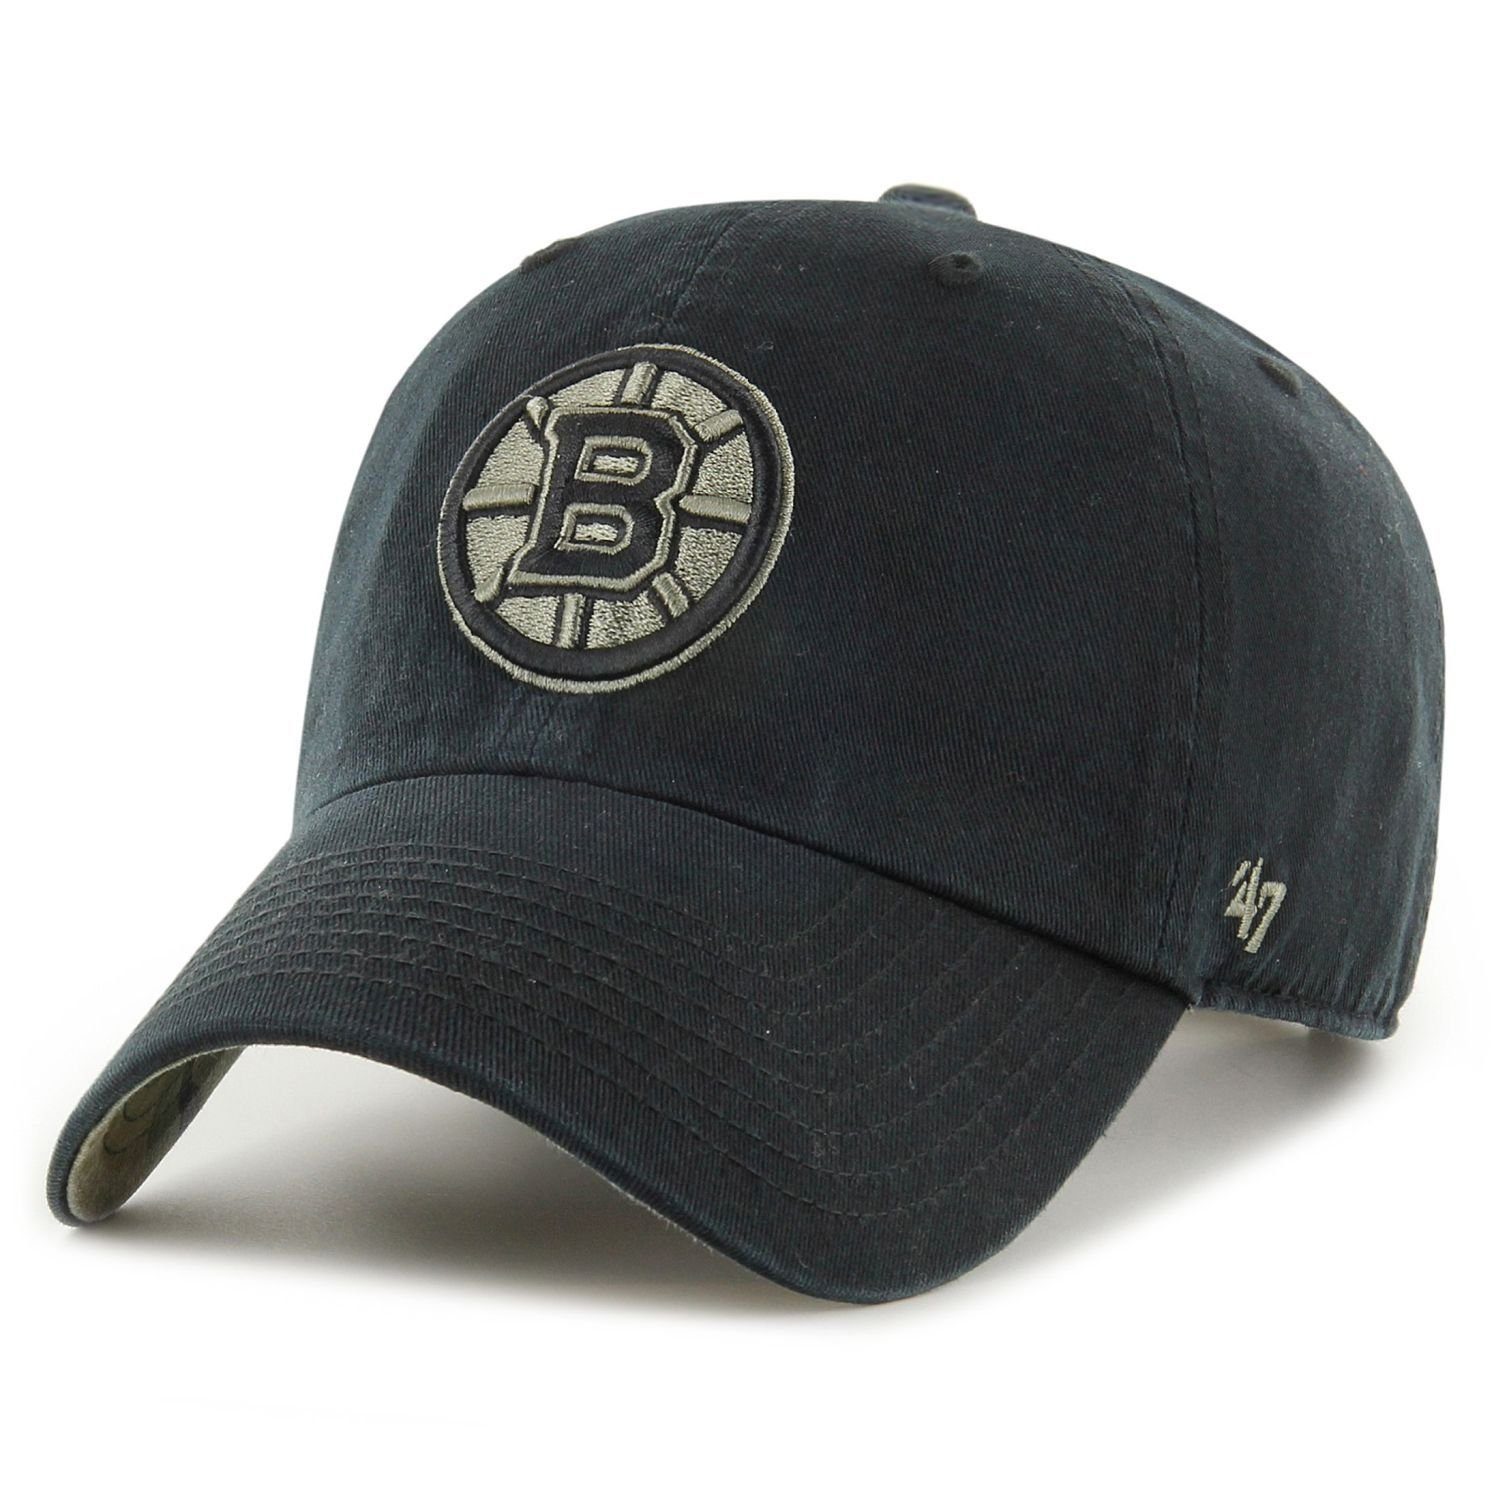 '47 Brand Trucker Cap Relaxed Fit CLEAN UP Boston Bruins